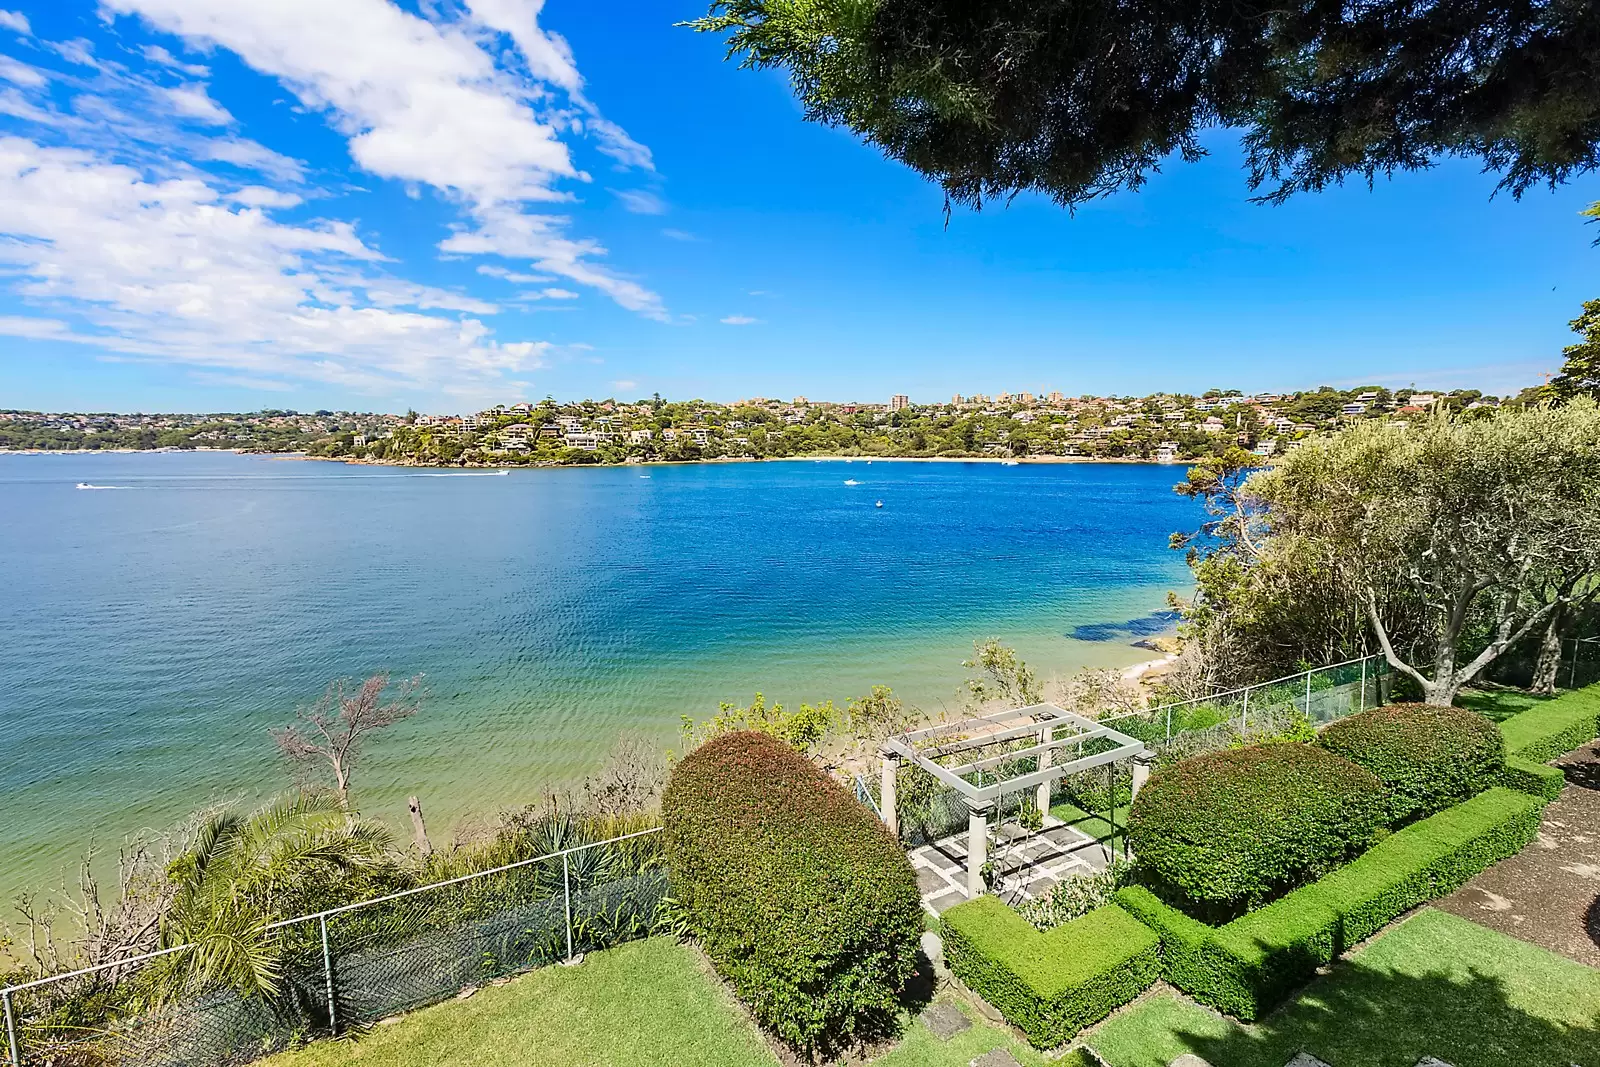 Photo #18: 1-3 Amiens Road, Clontarf - Sold by Sydney Sotheby's International Realty